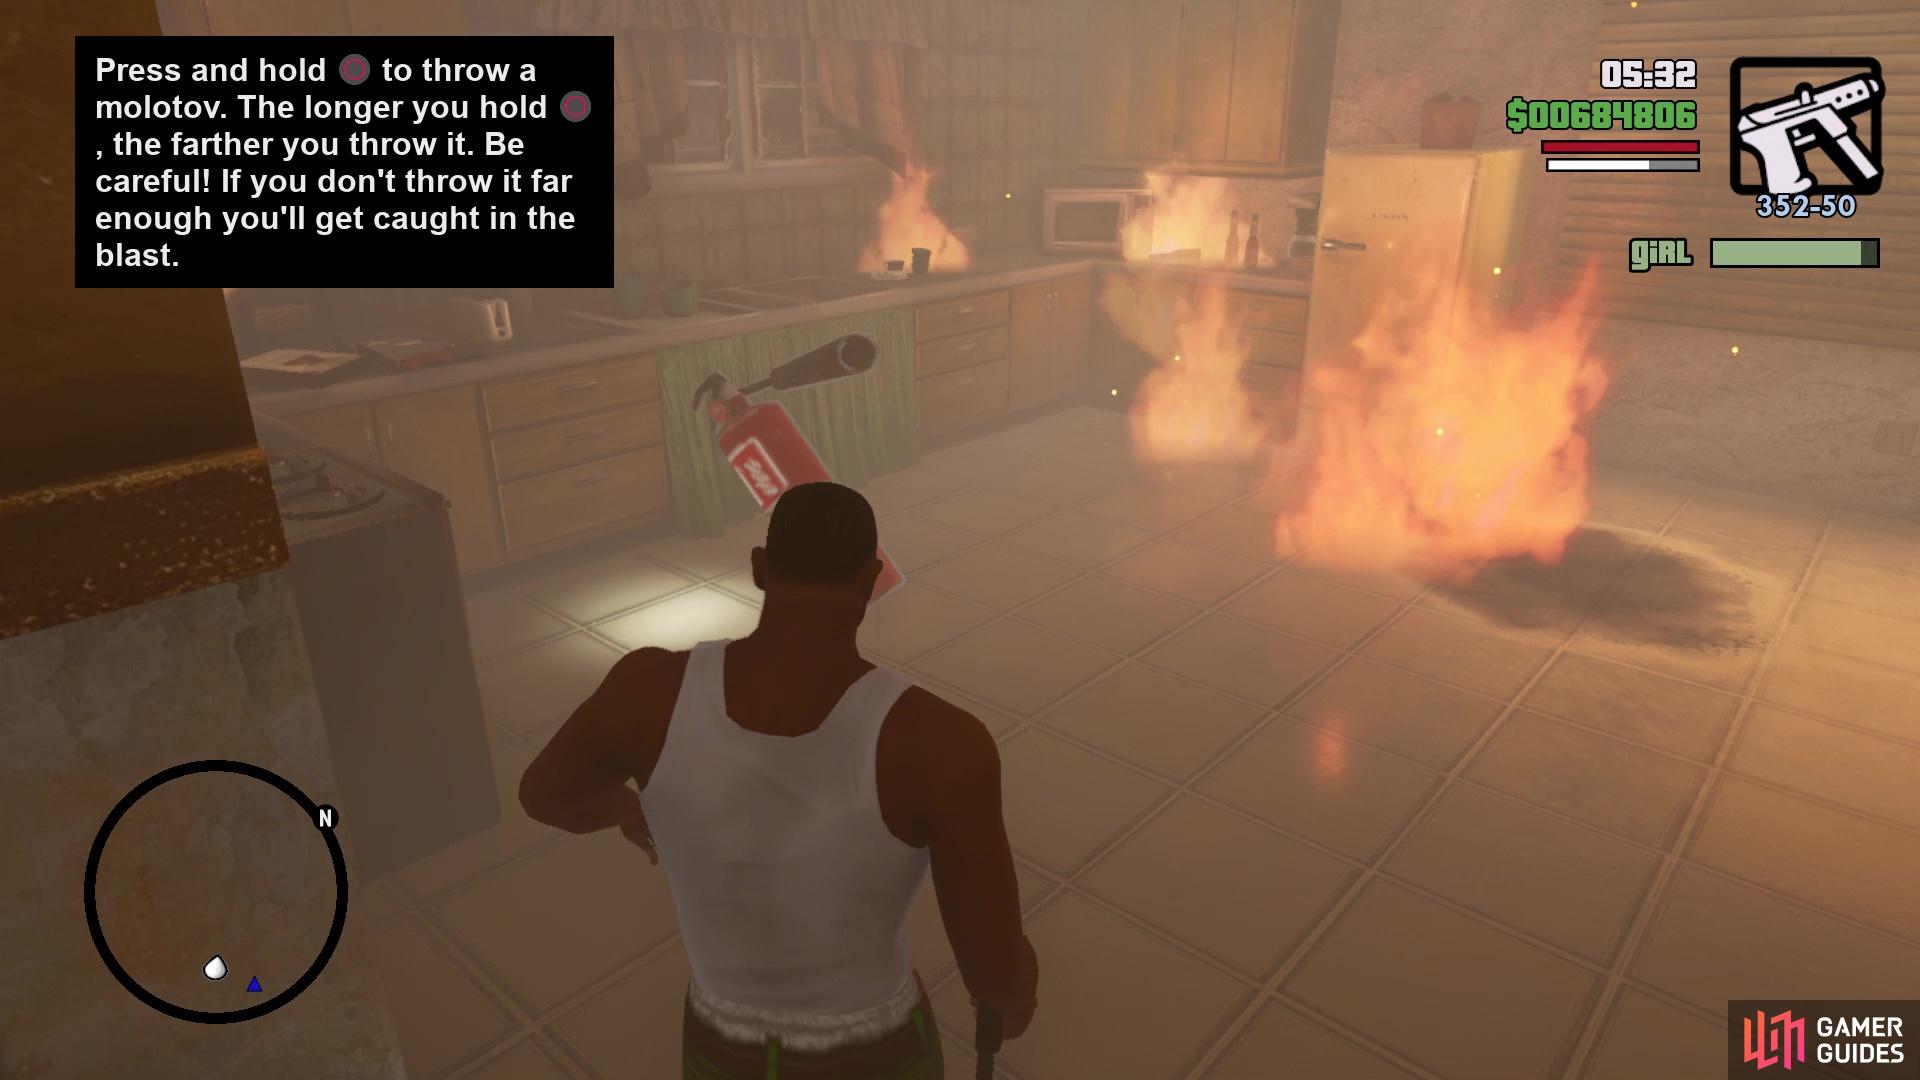 The fire extinguisher will be in the kitchen